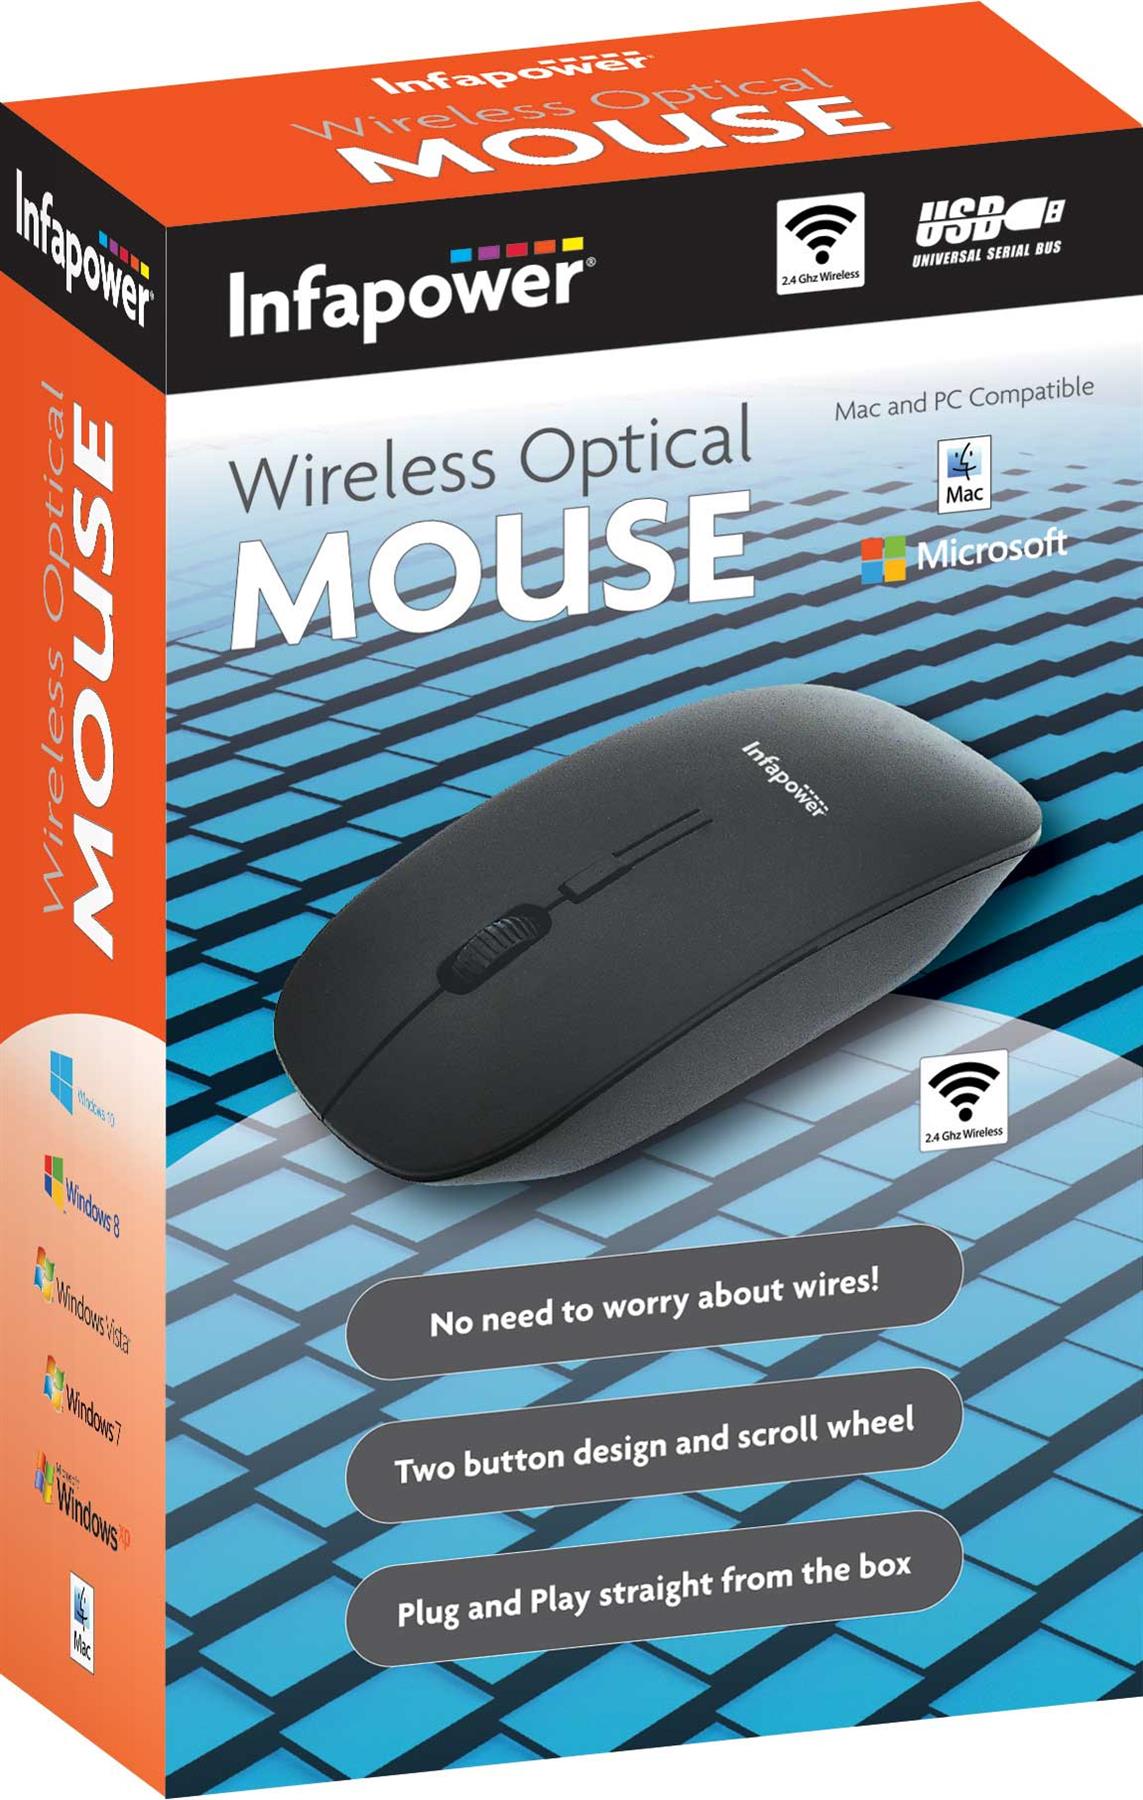 Infapower Wireless Optical Mouse